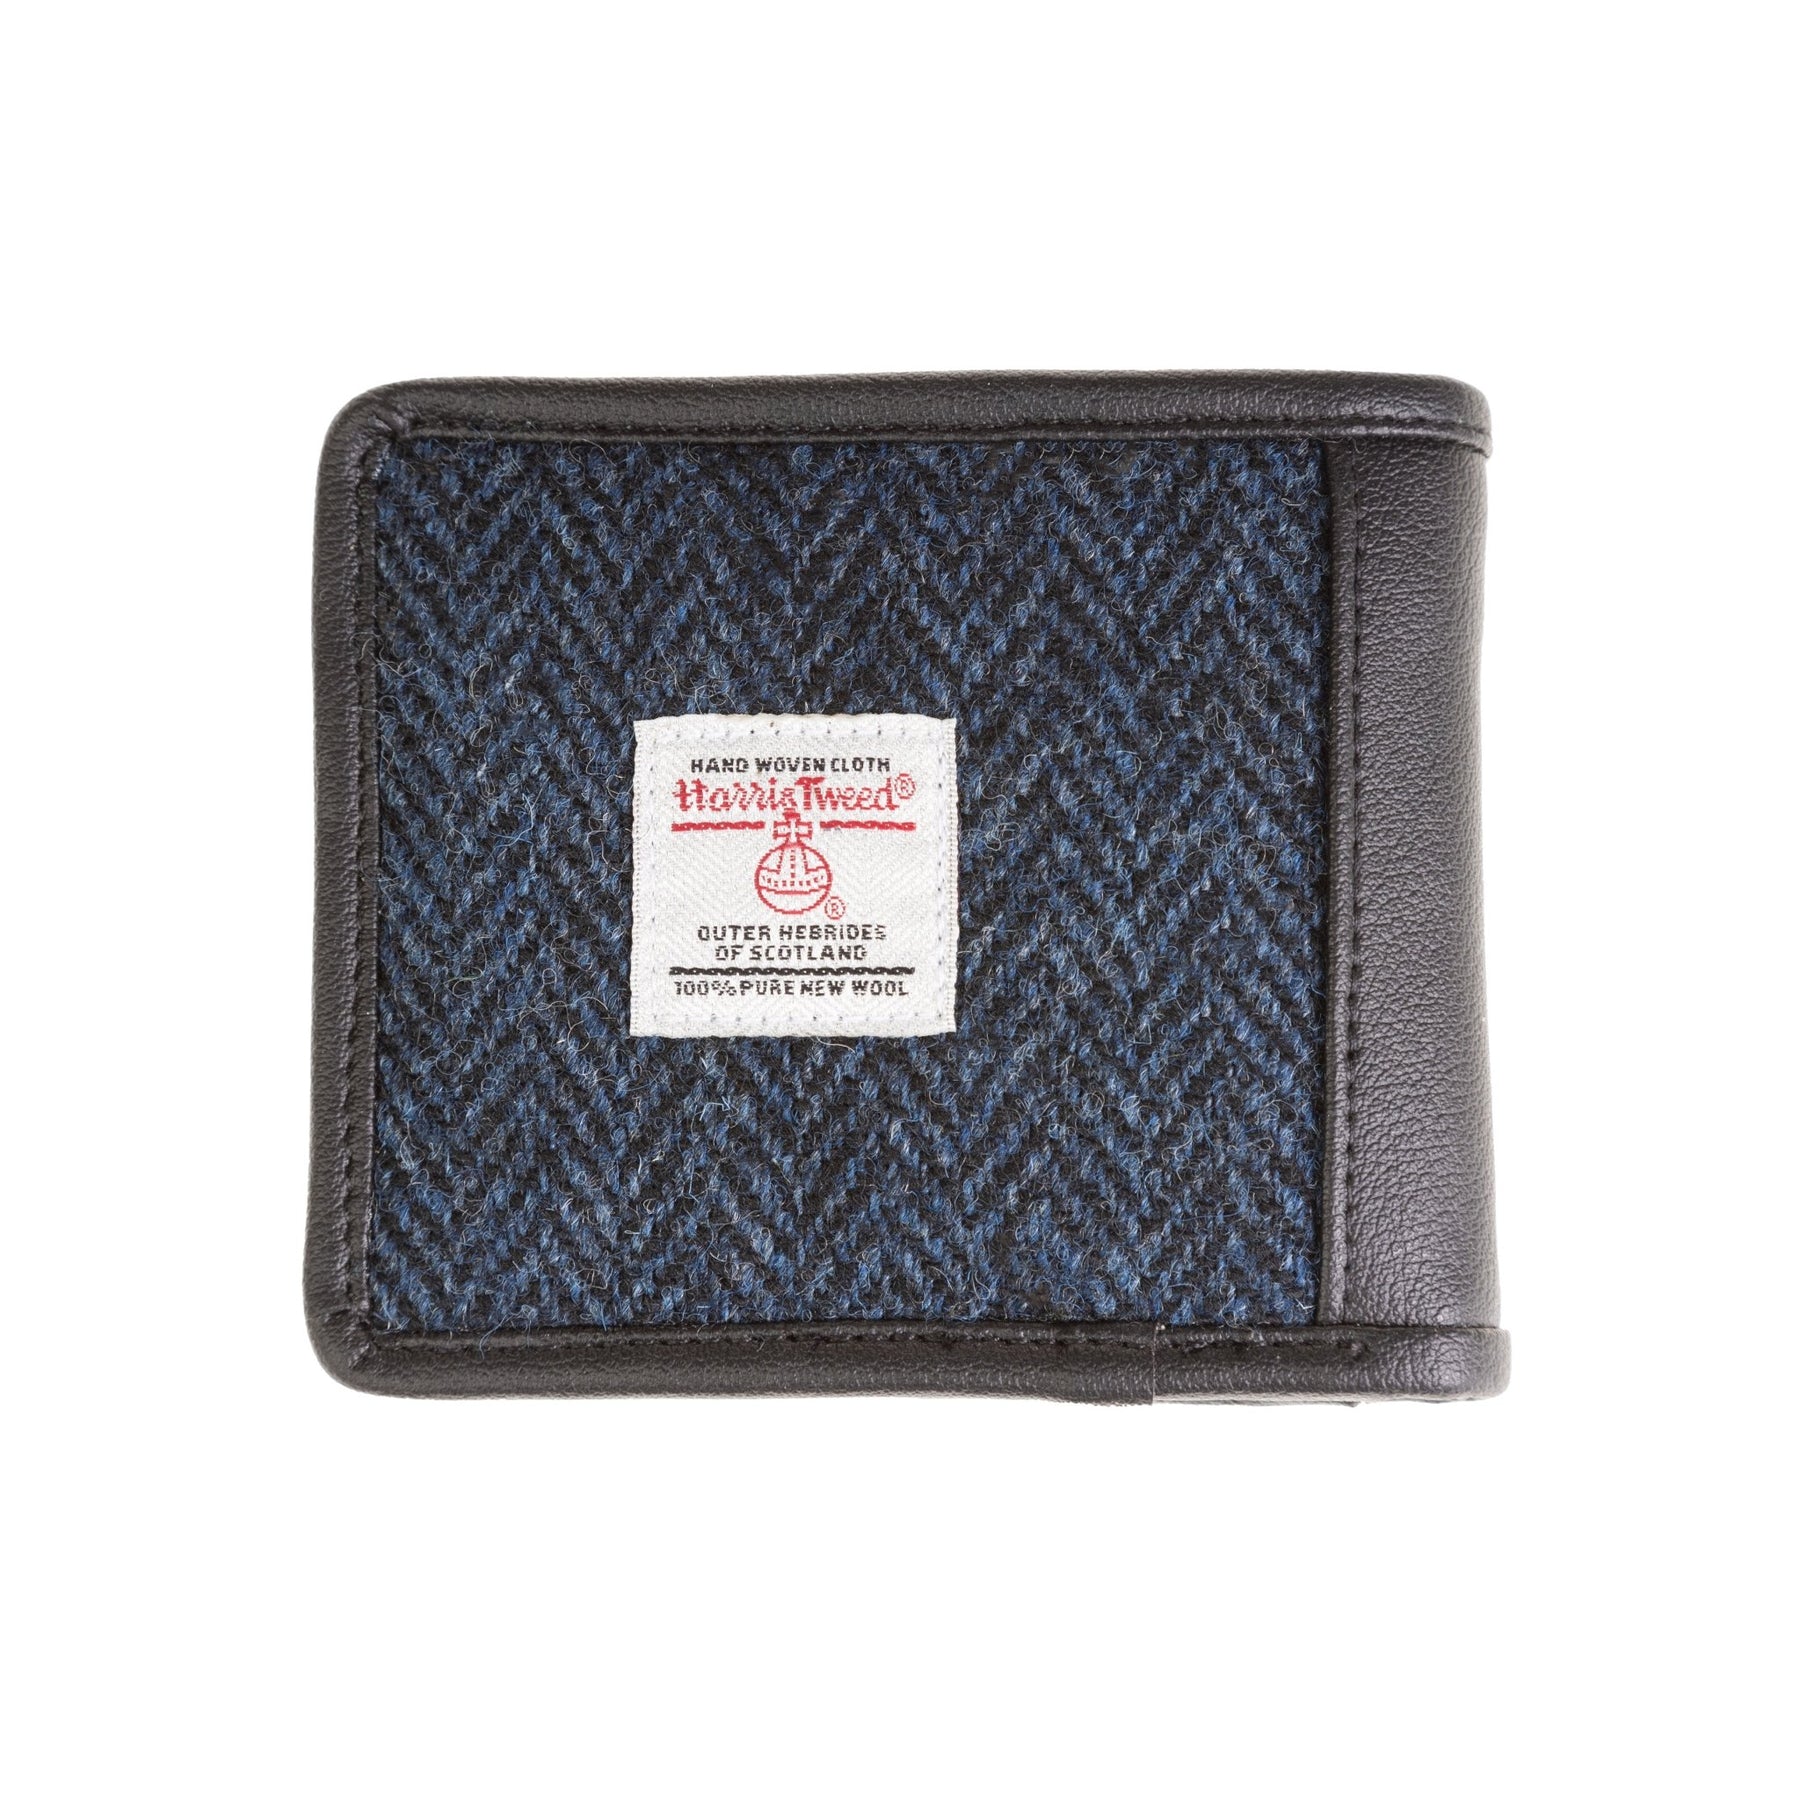 Custom Men's Wallets Personalised Any Way You Want! | Teals Prairie